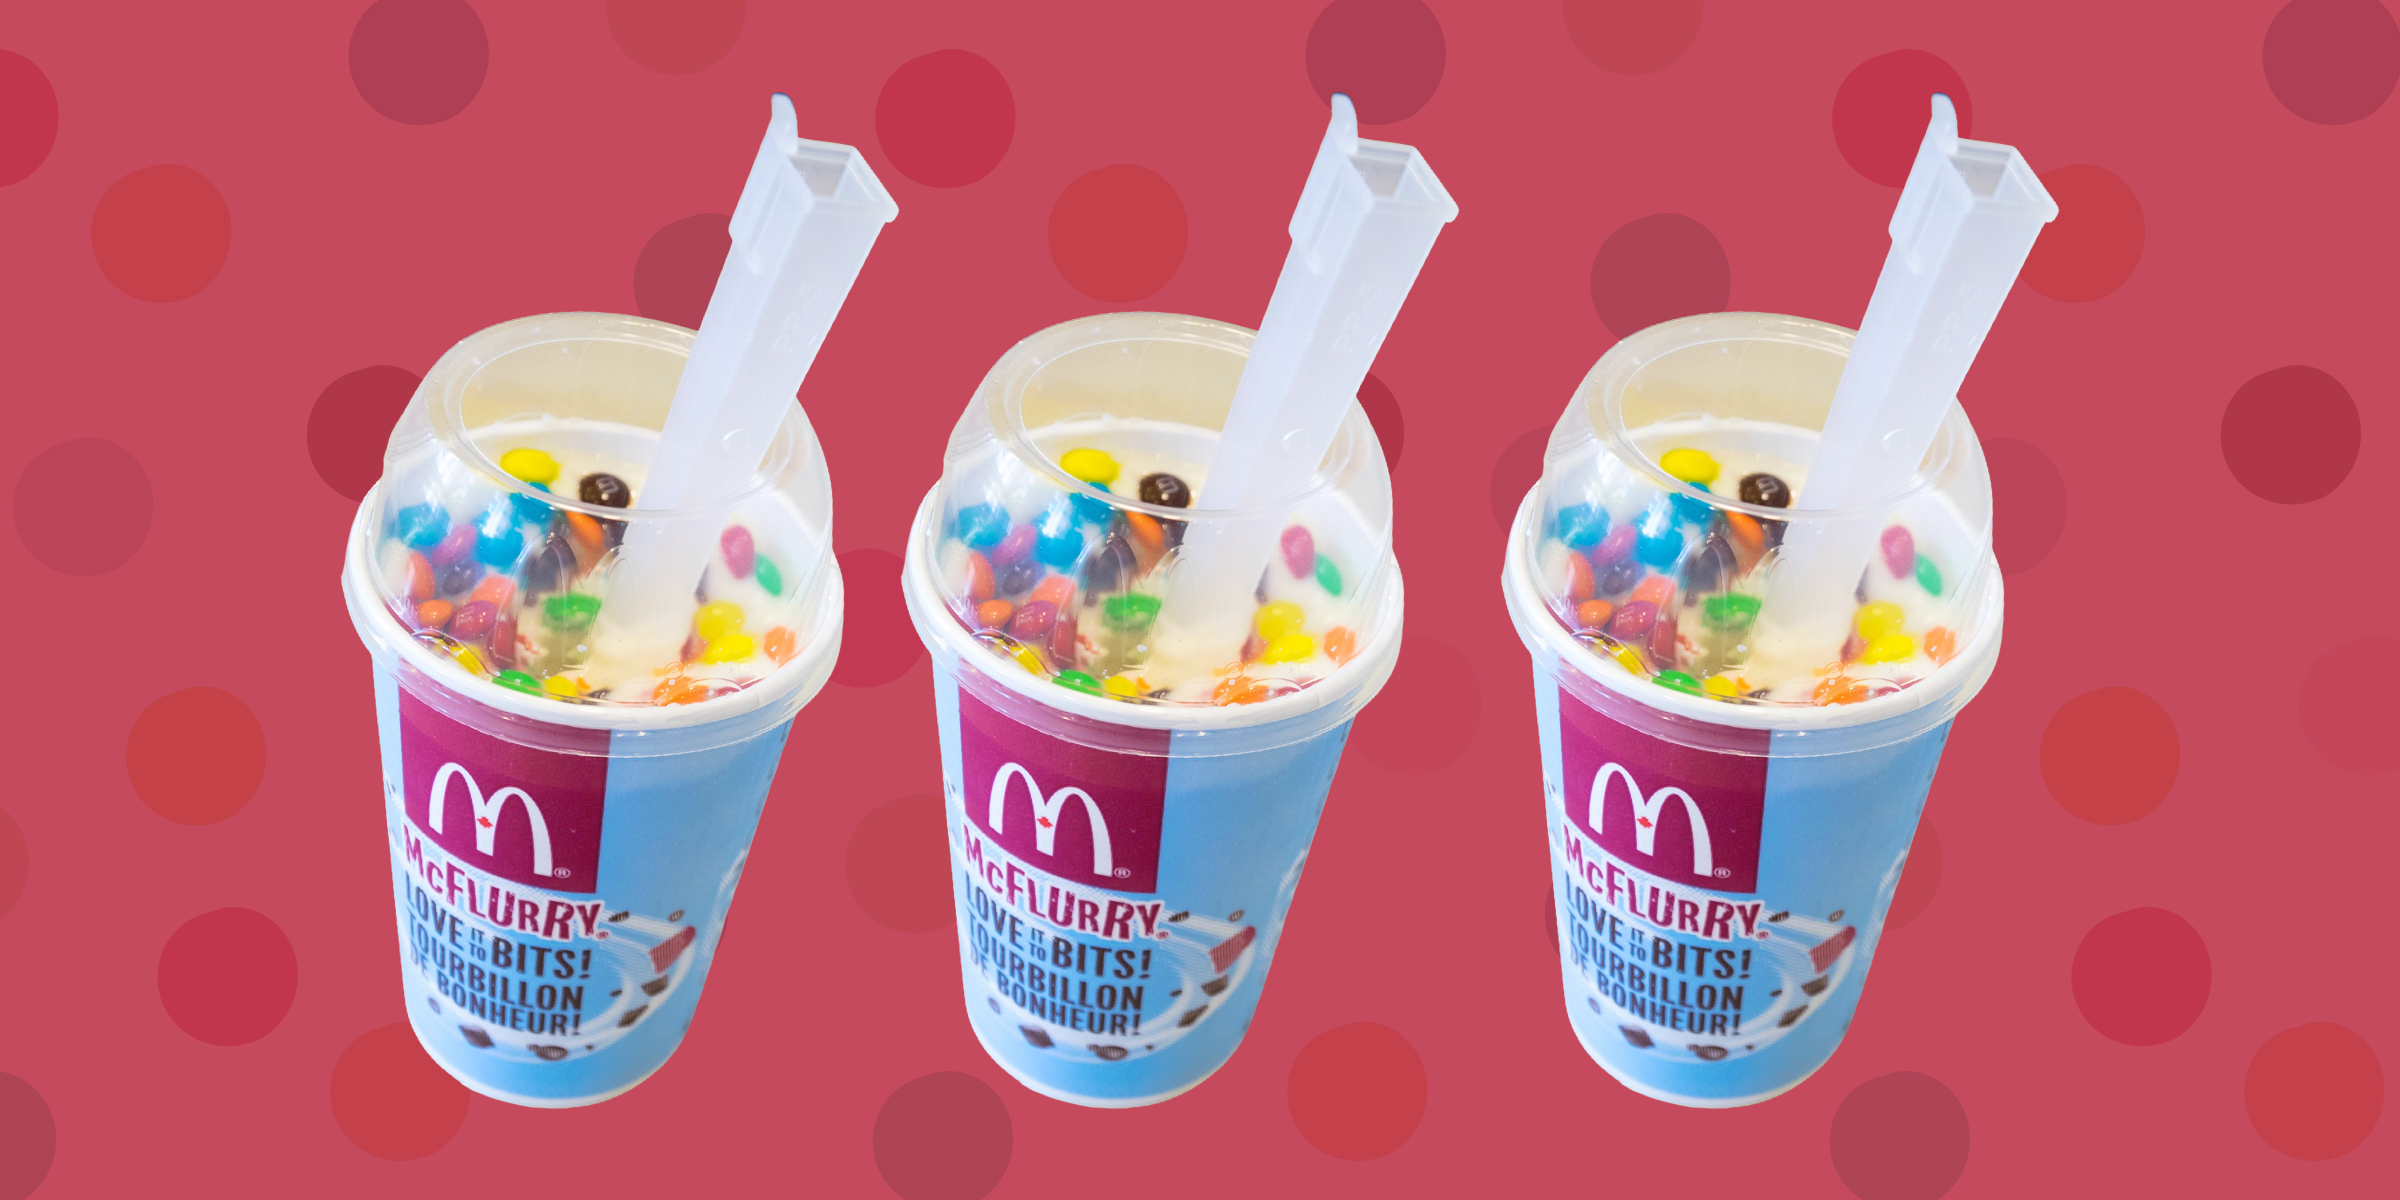 SA McDonald’s Employee Sentenced To 10 Years In Prison For Spitting On McFlurry Ice Cream